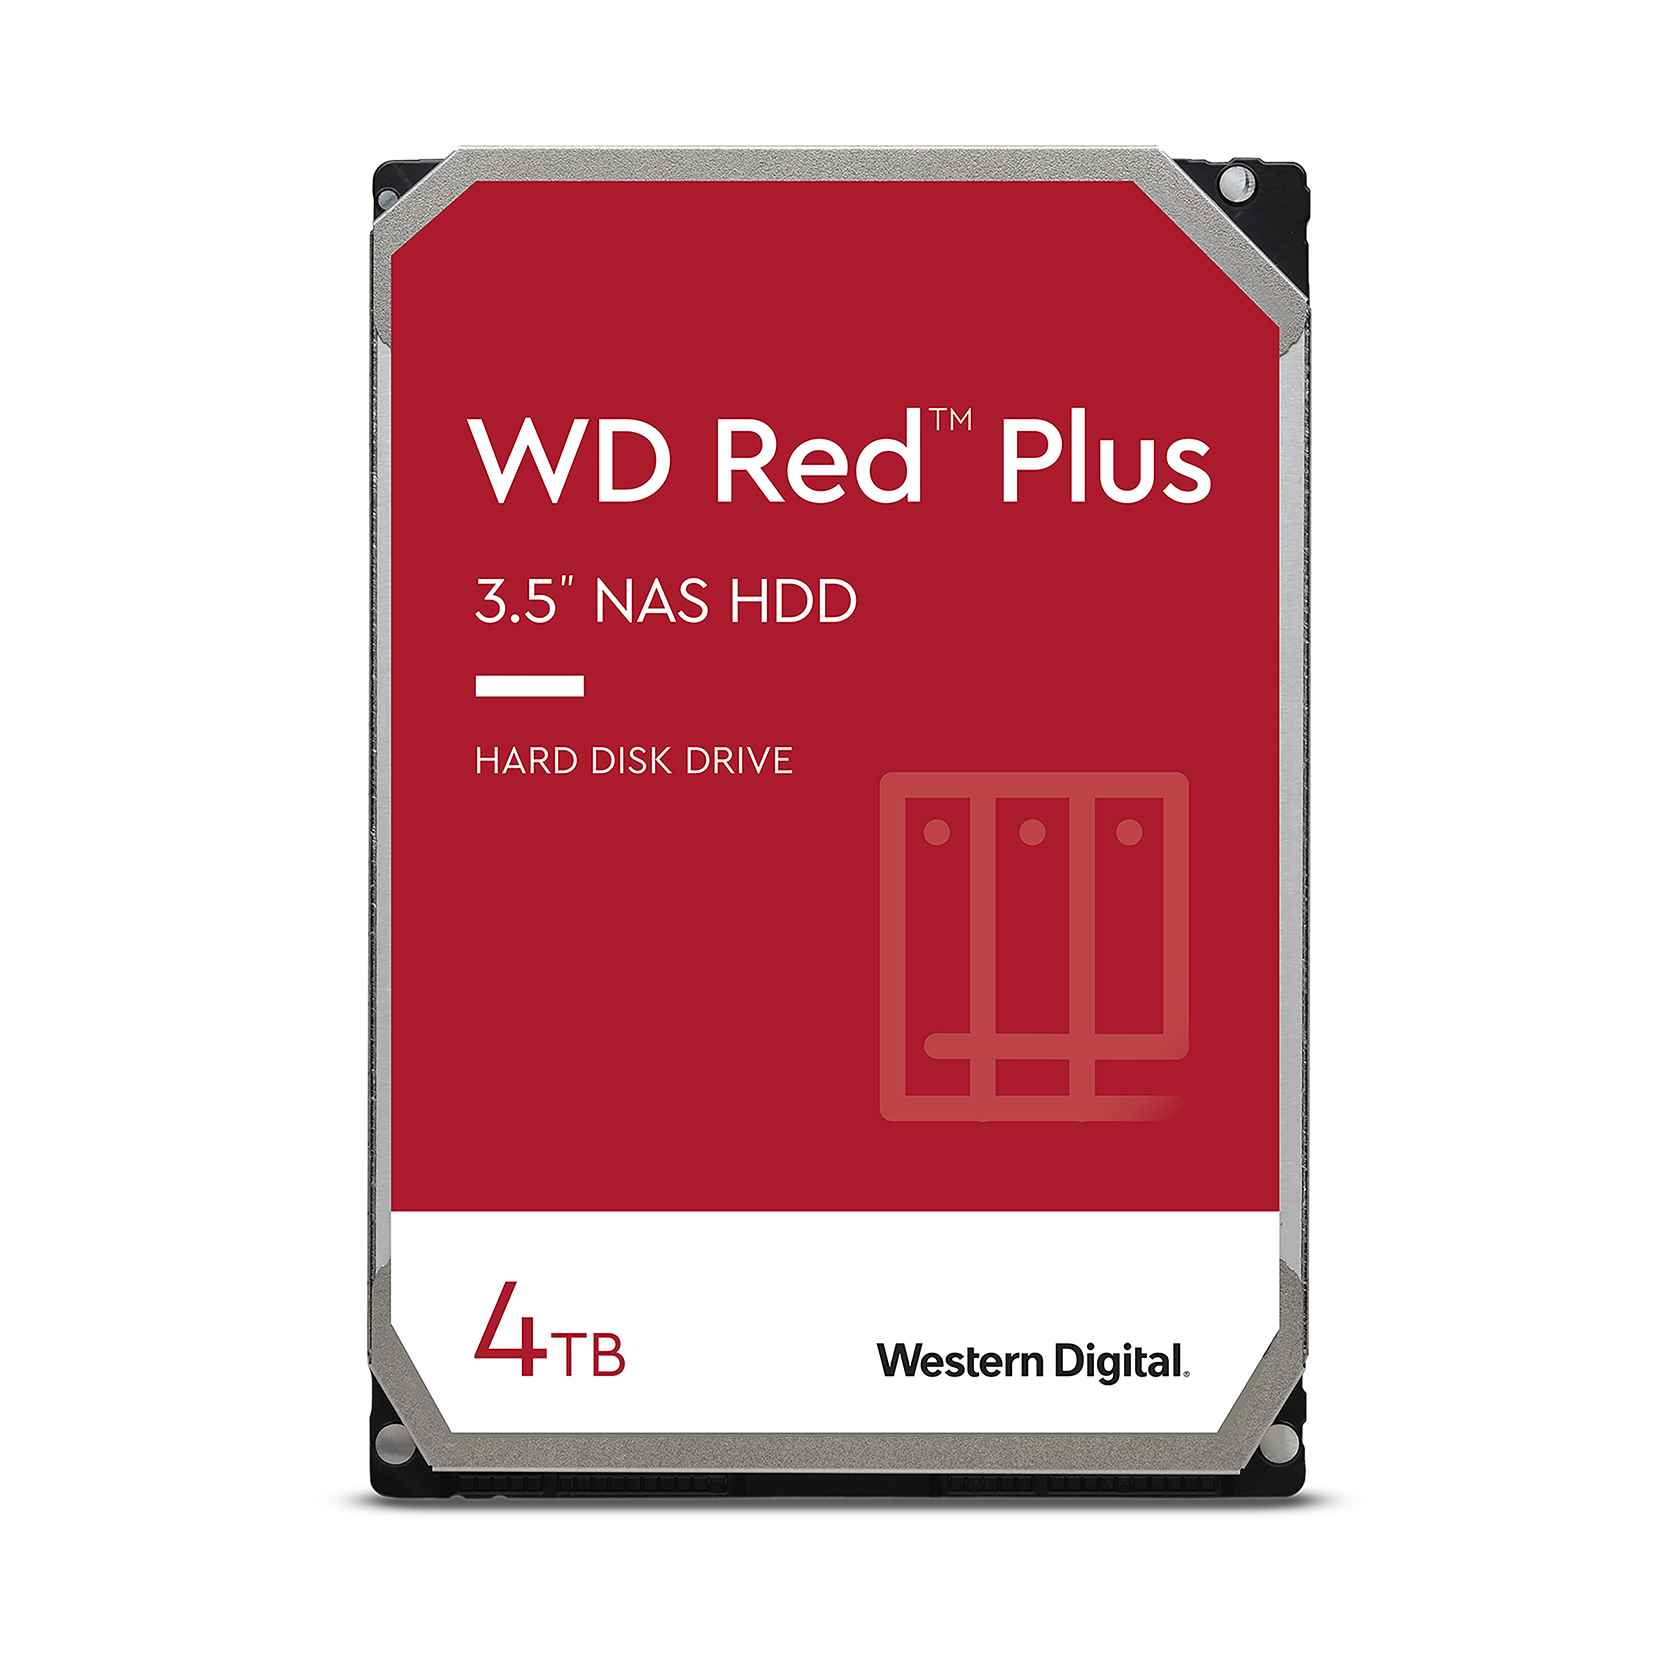 WD RED PLUS NAS WD40EFPX 4TB SATAIII/ 600 256MB cache 180MB/ s CMR0 